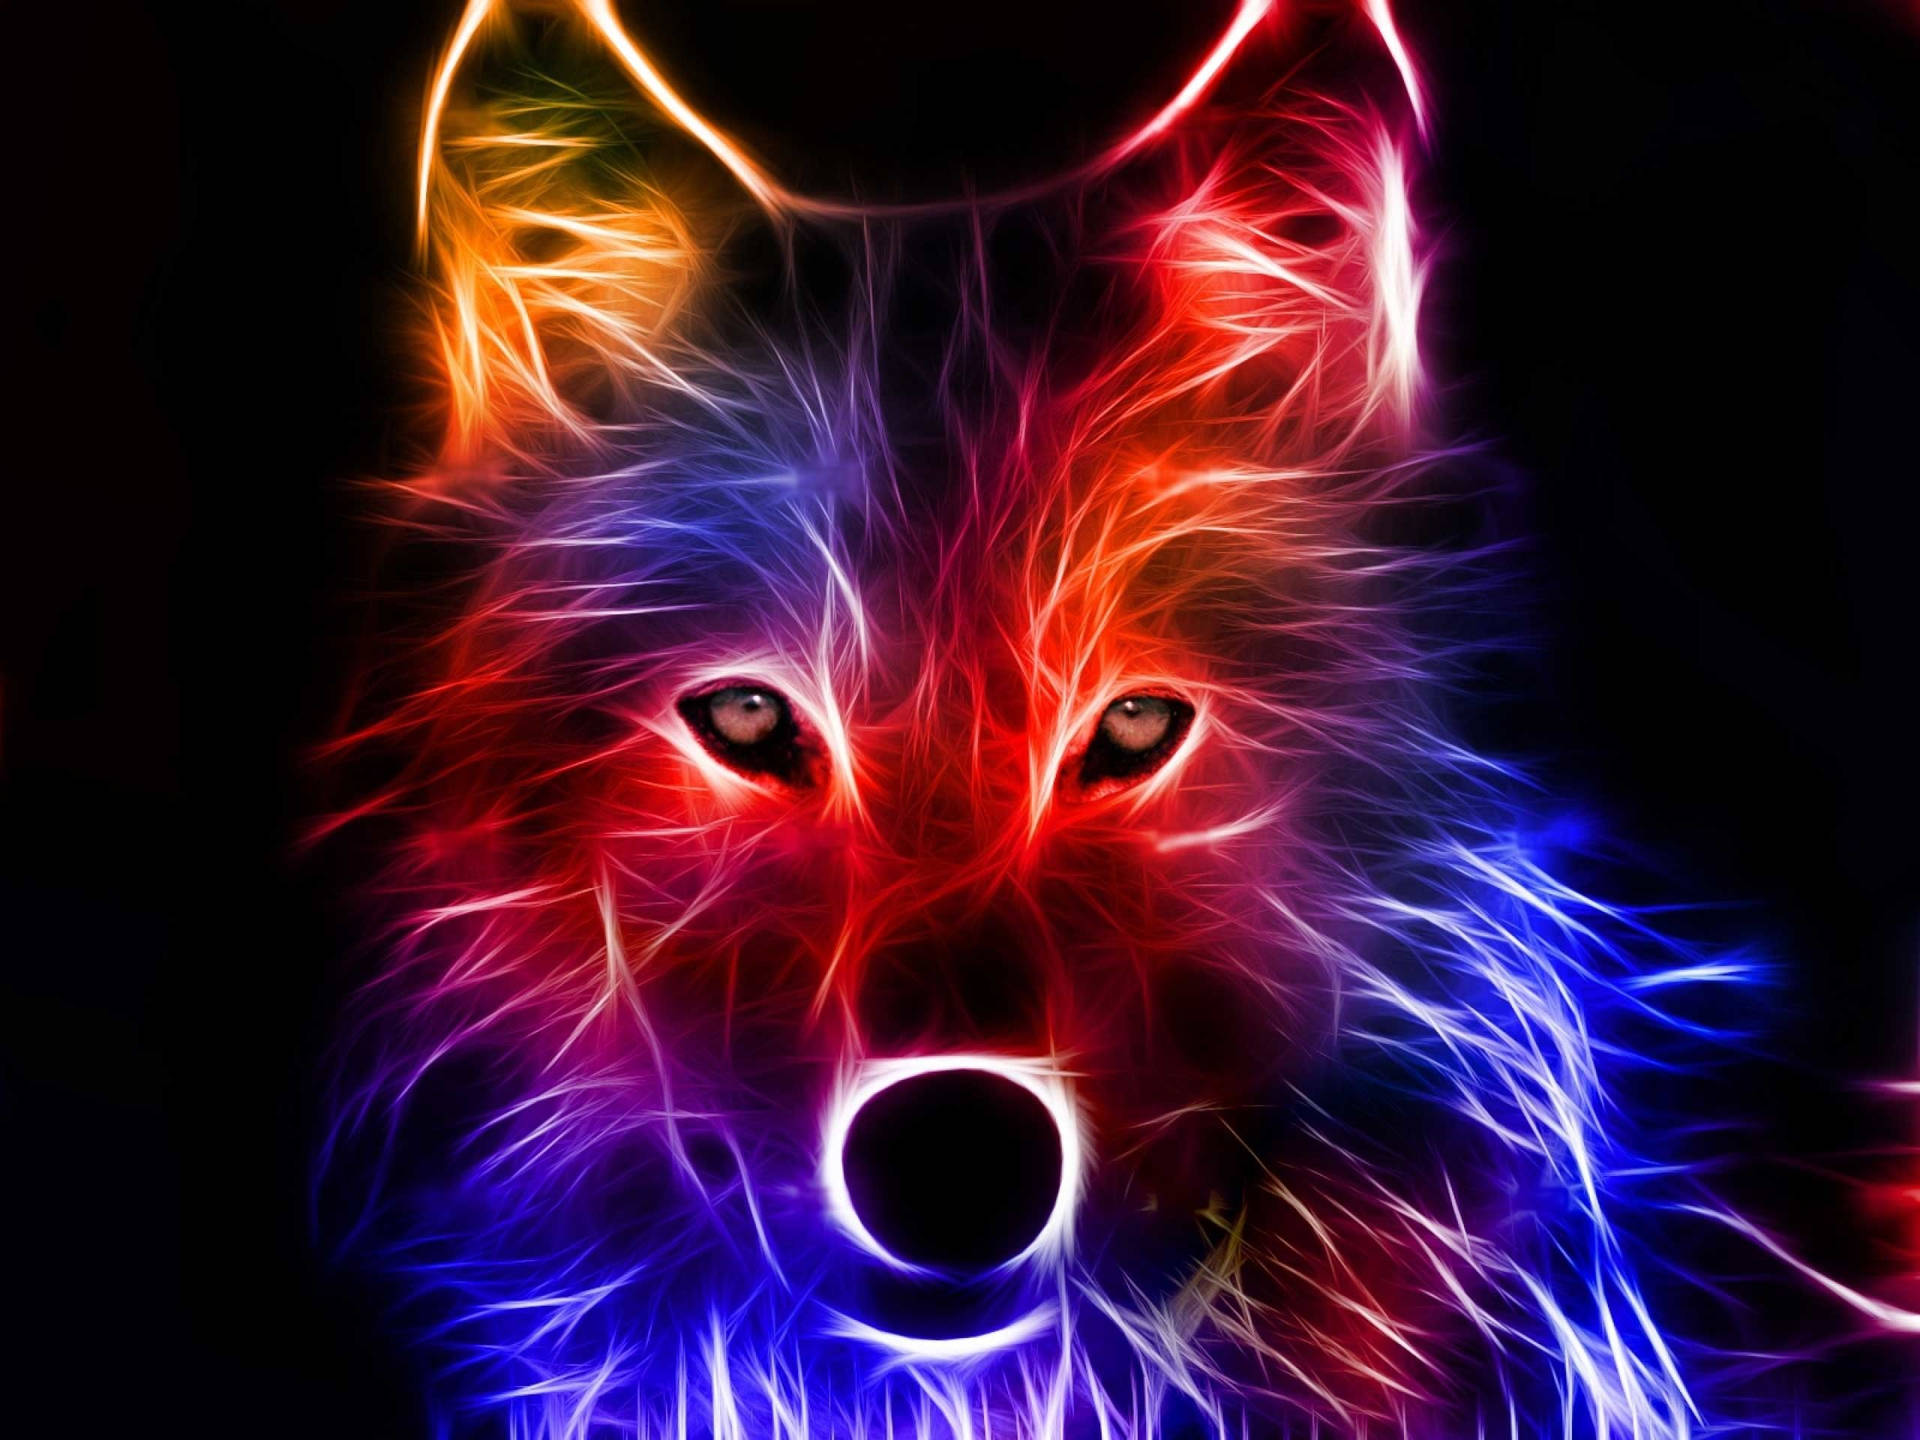 A wolf made up of neon-colored strokes, animated HD wallpaper.